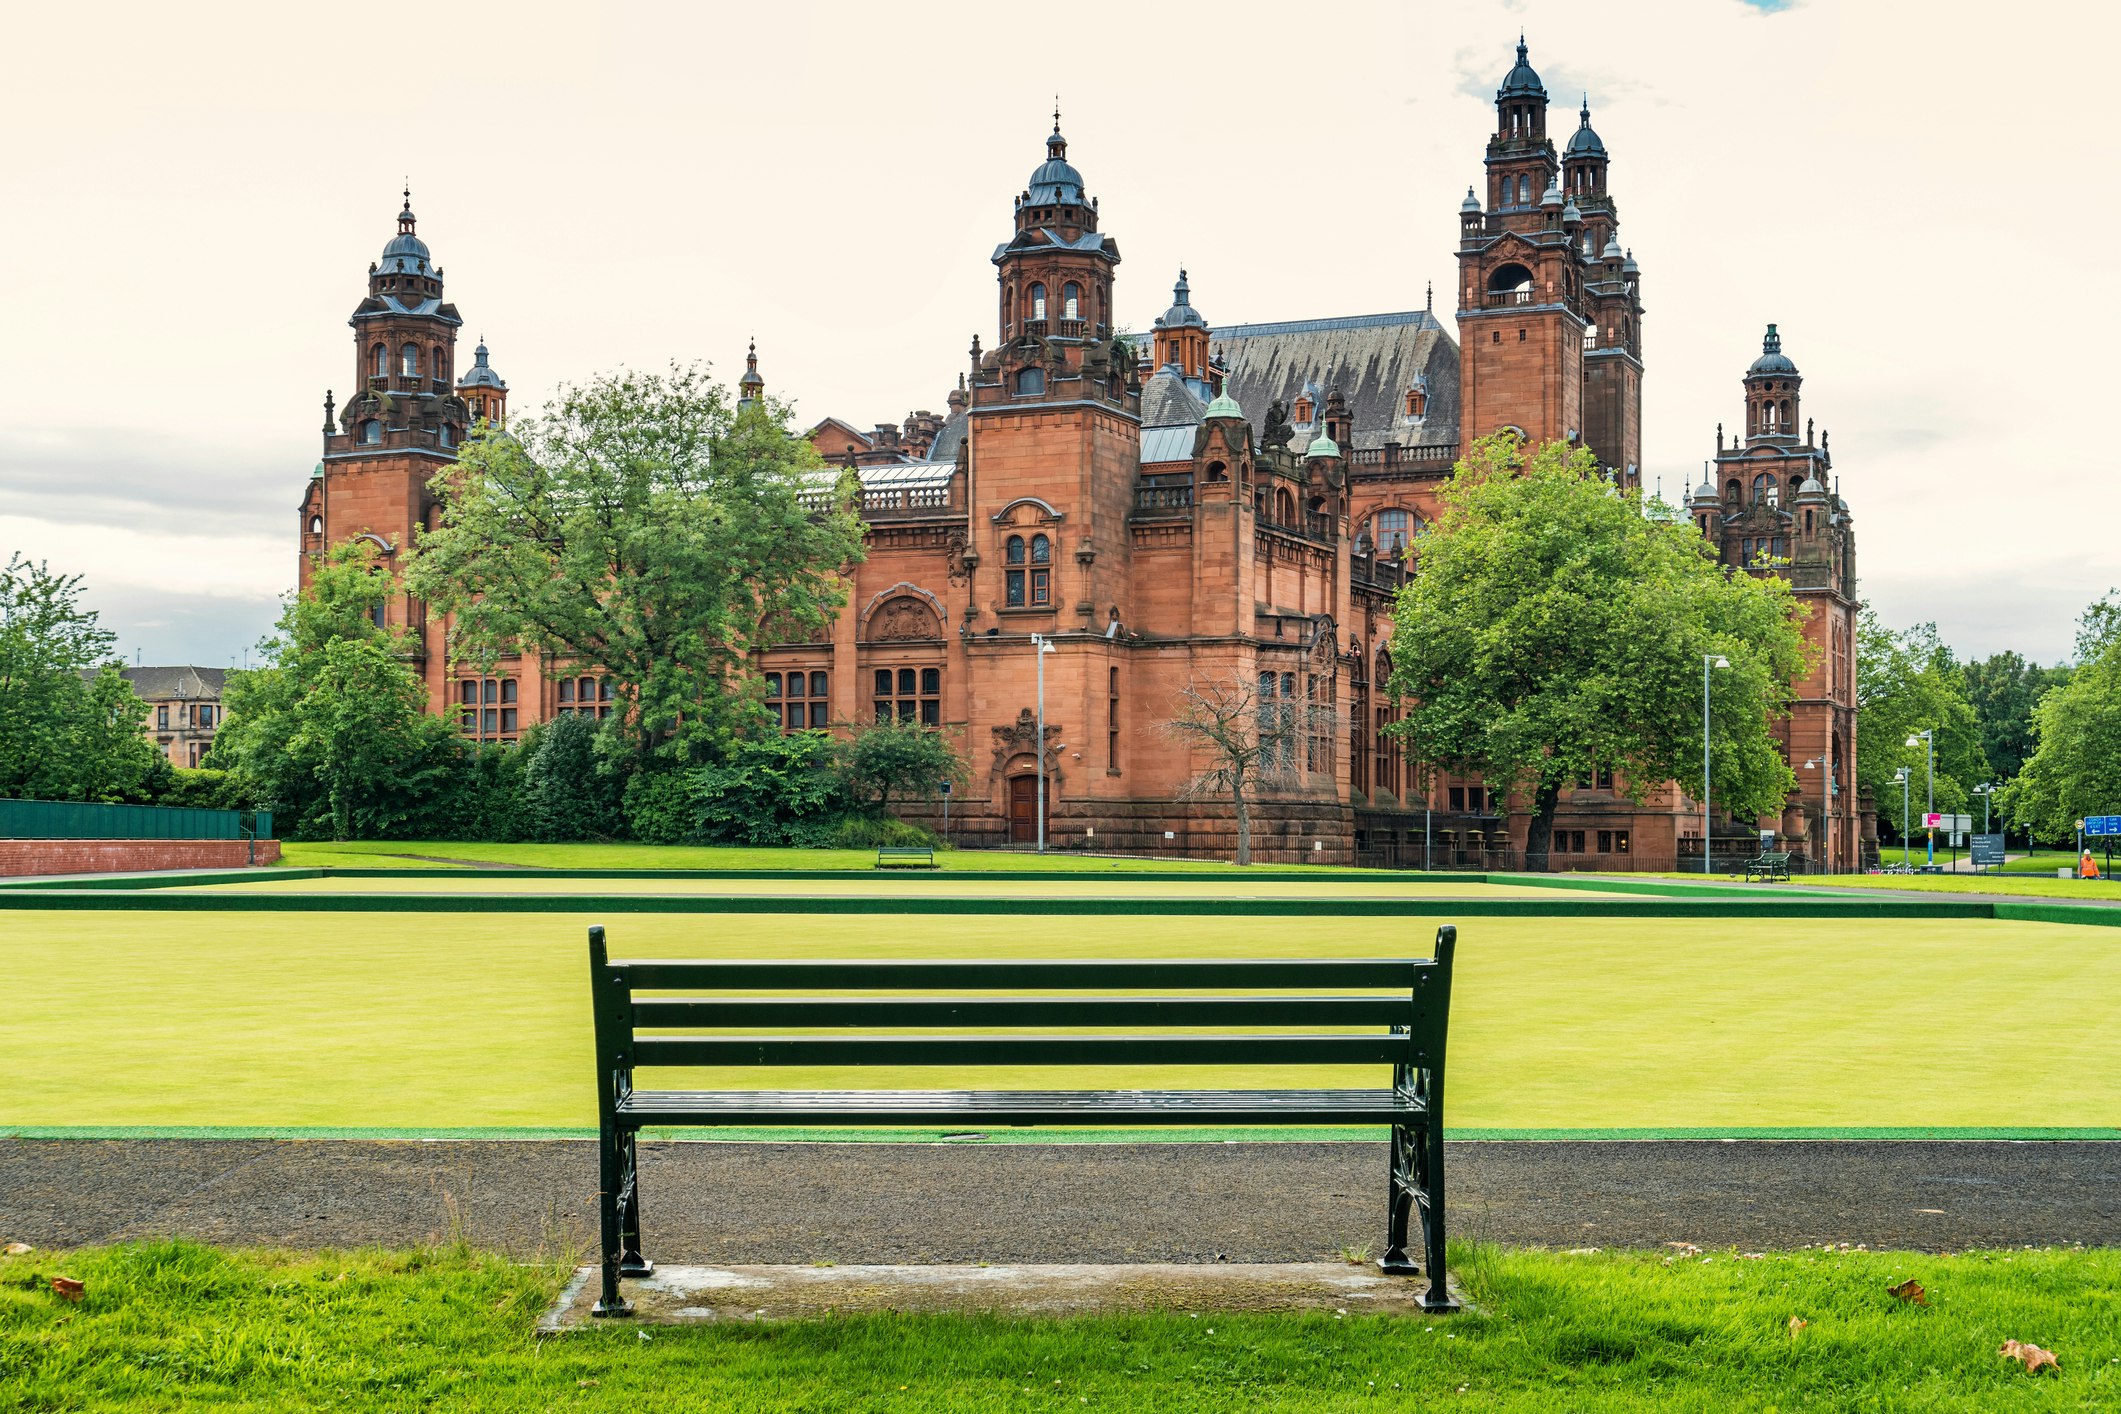 Glasgow's Kelvingrove Art Gallery, a beautiful baroque building on a sprawling green lawn from the vantage point of a park bench.